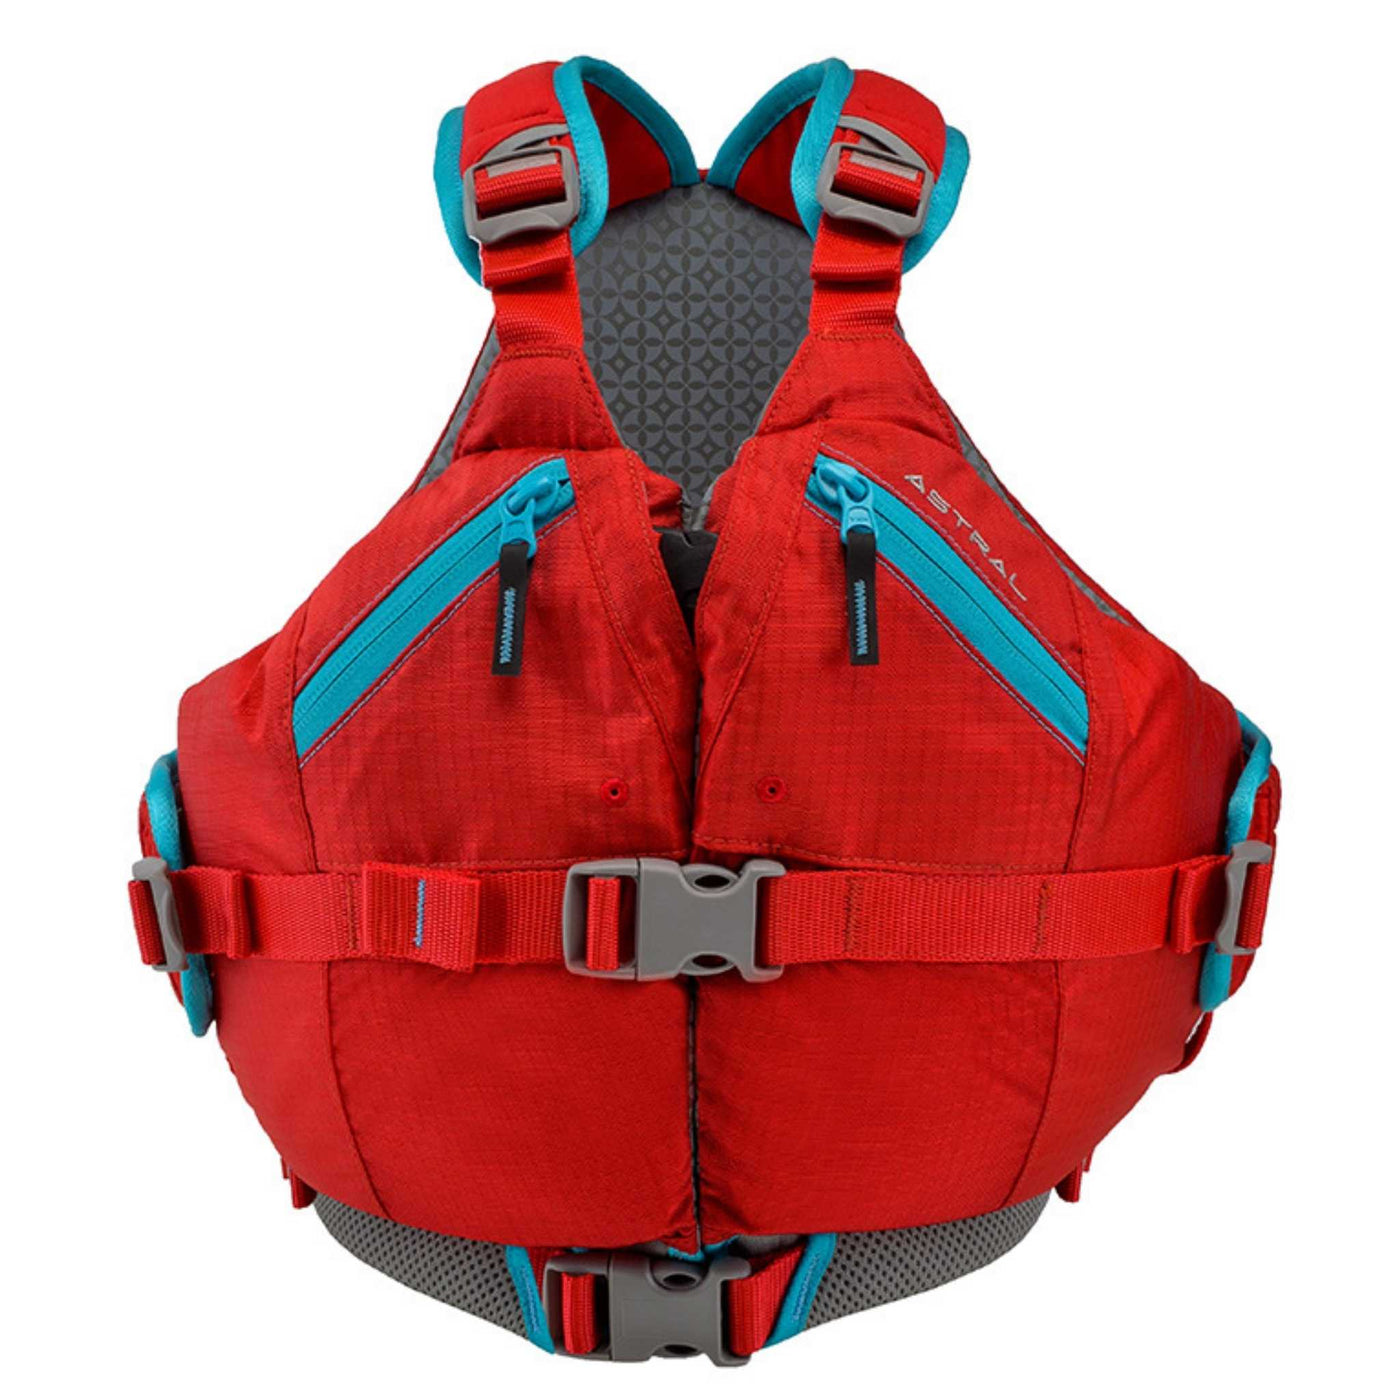 Astral Otter Kids PFD | Astral NZ | Sea, Whitewater, Sailing PFDFurther Faster Christchurch NZ #red